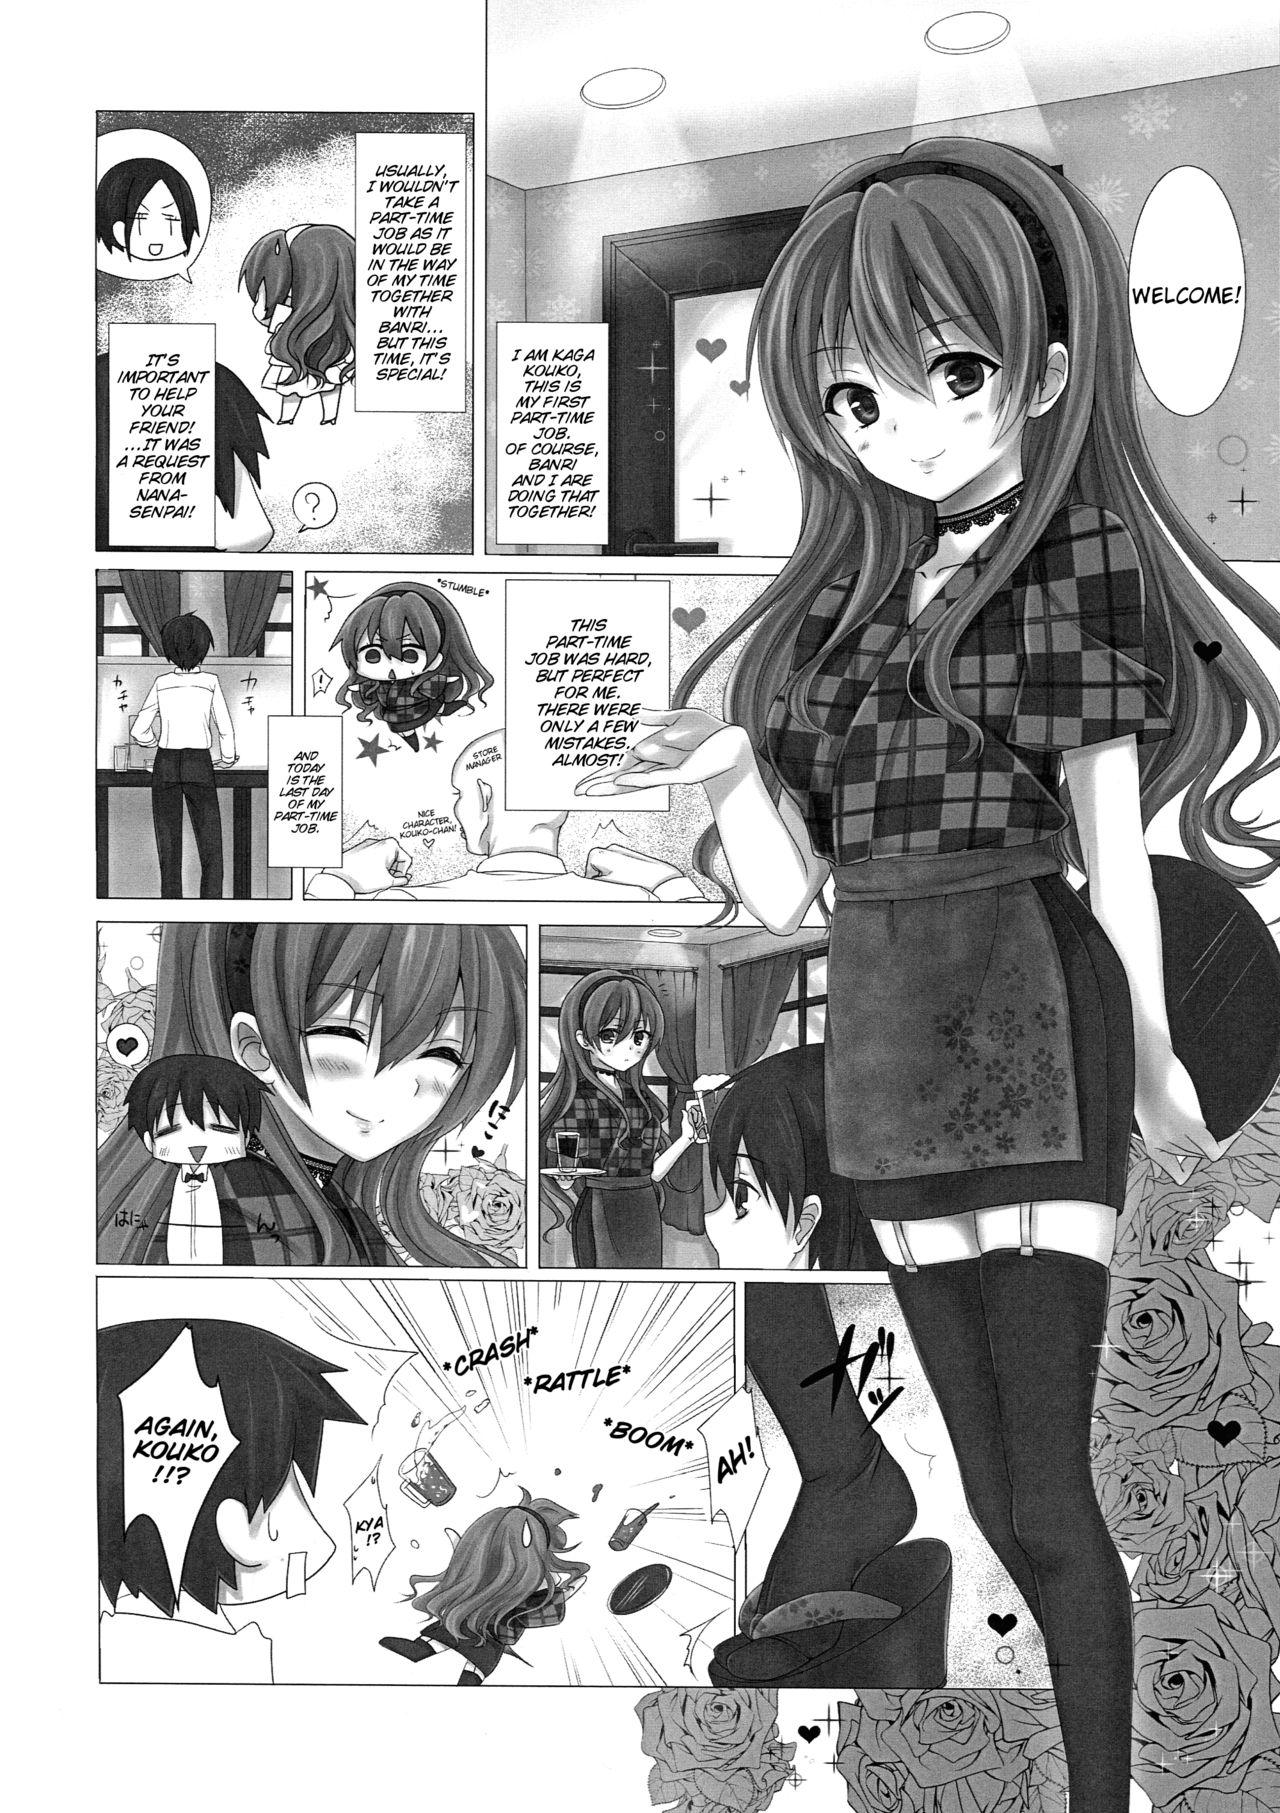 Perra KISS ME TOUCH ME - Golden time Panty - Page 3